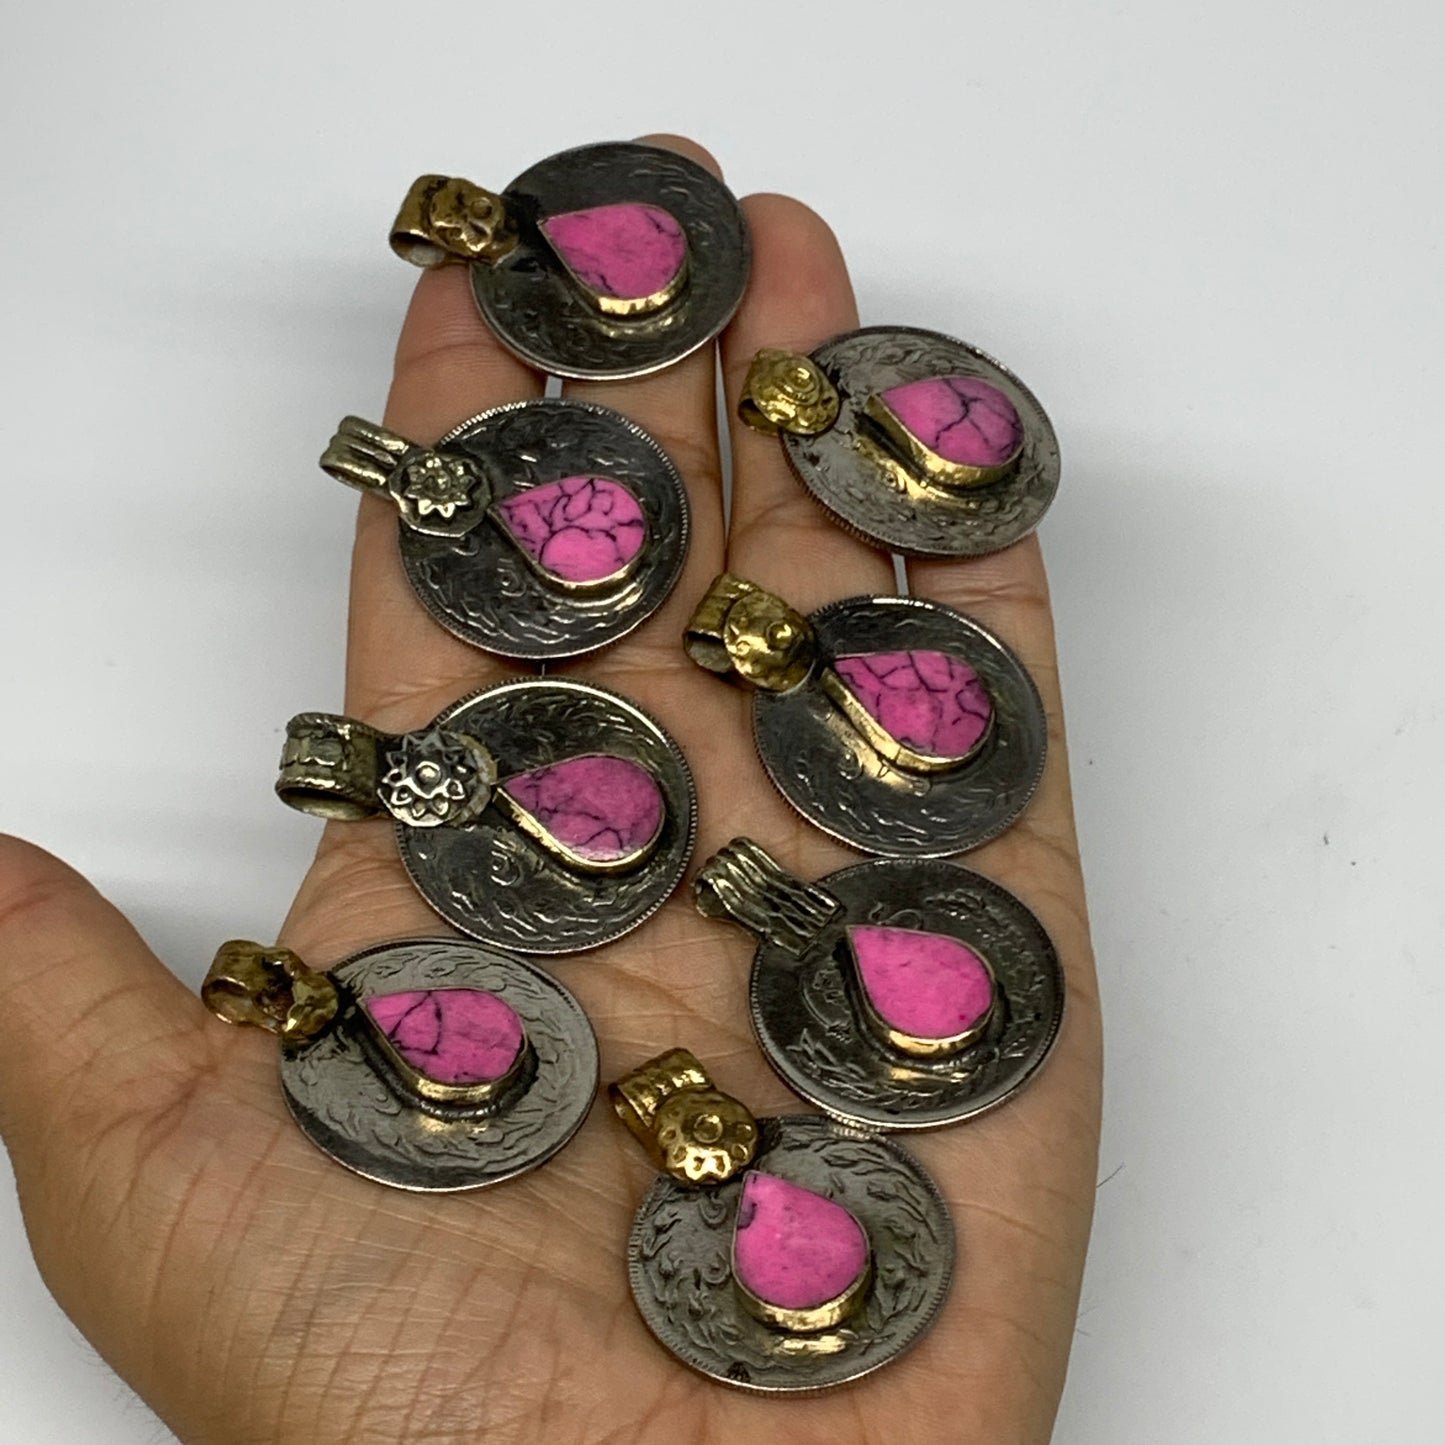 89g, 8pcs, Turkmen Coins Jeweled Synthetic Pink Tribal @Afghanistan, B14527